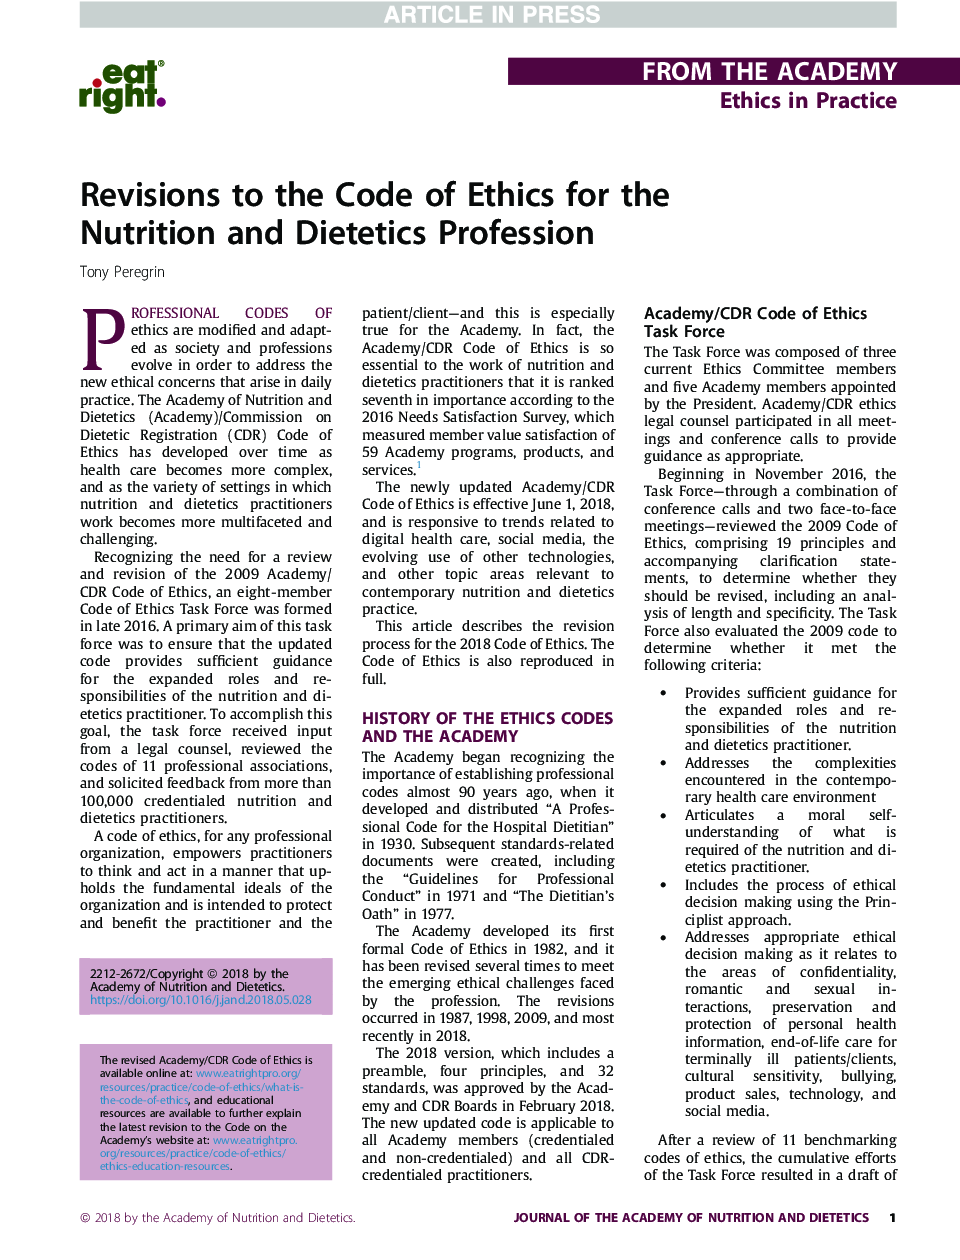 Revisions to the Code of Ethics for the NutritionÂ and Dietetics Profession